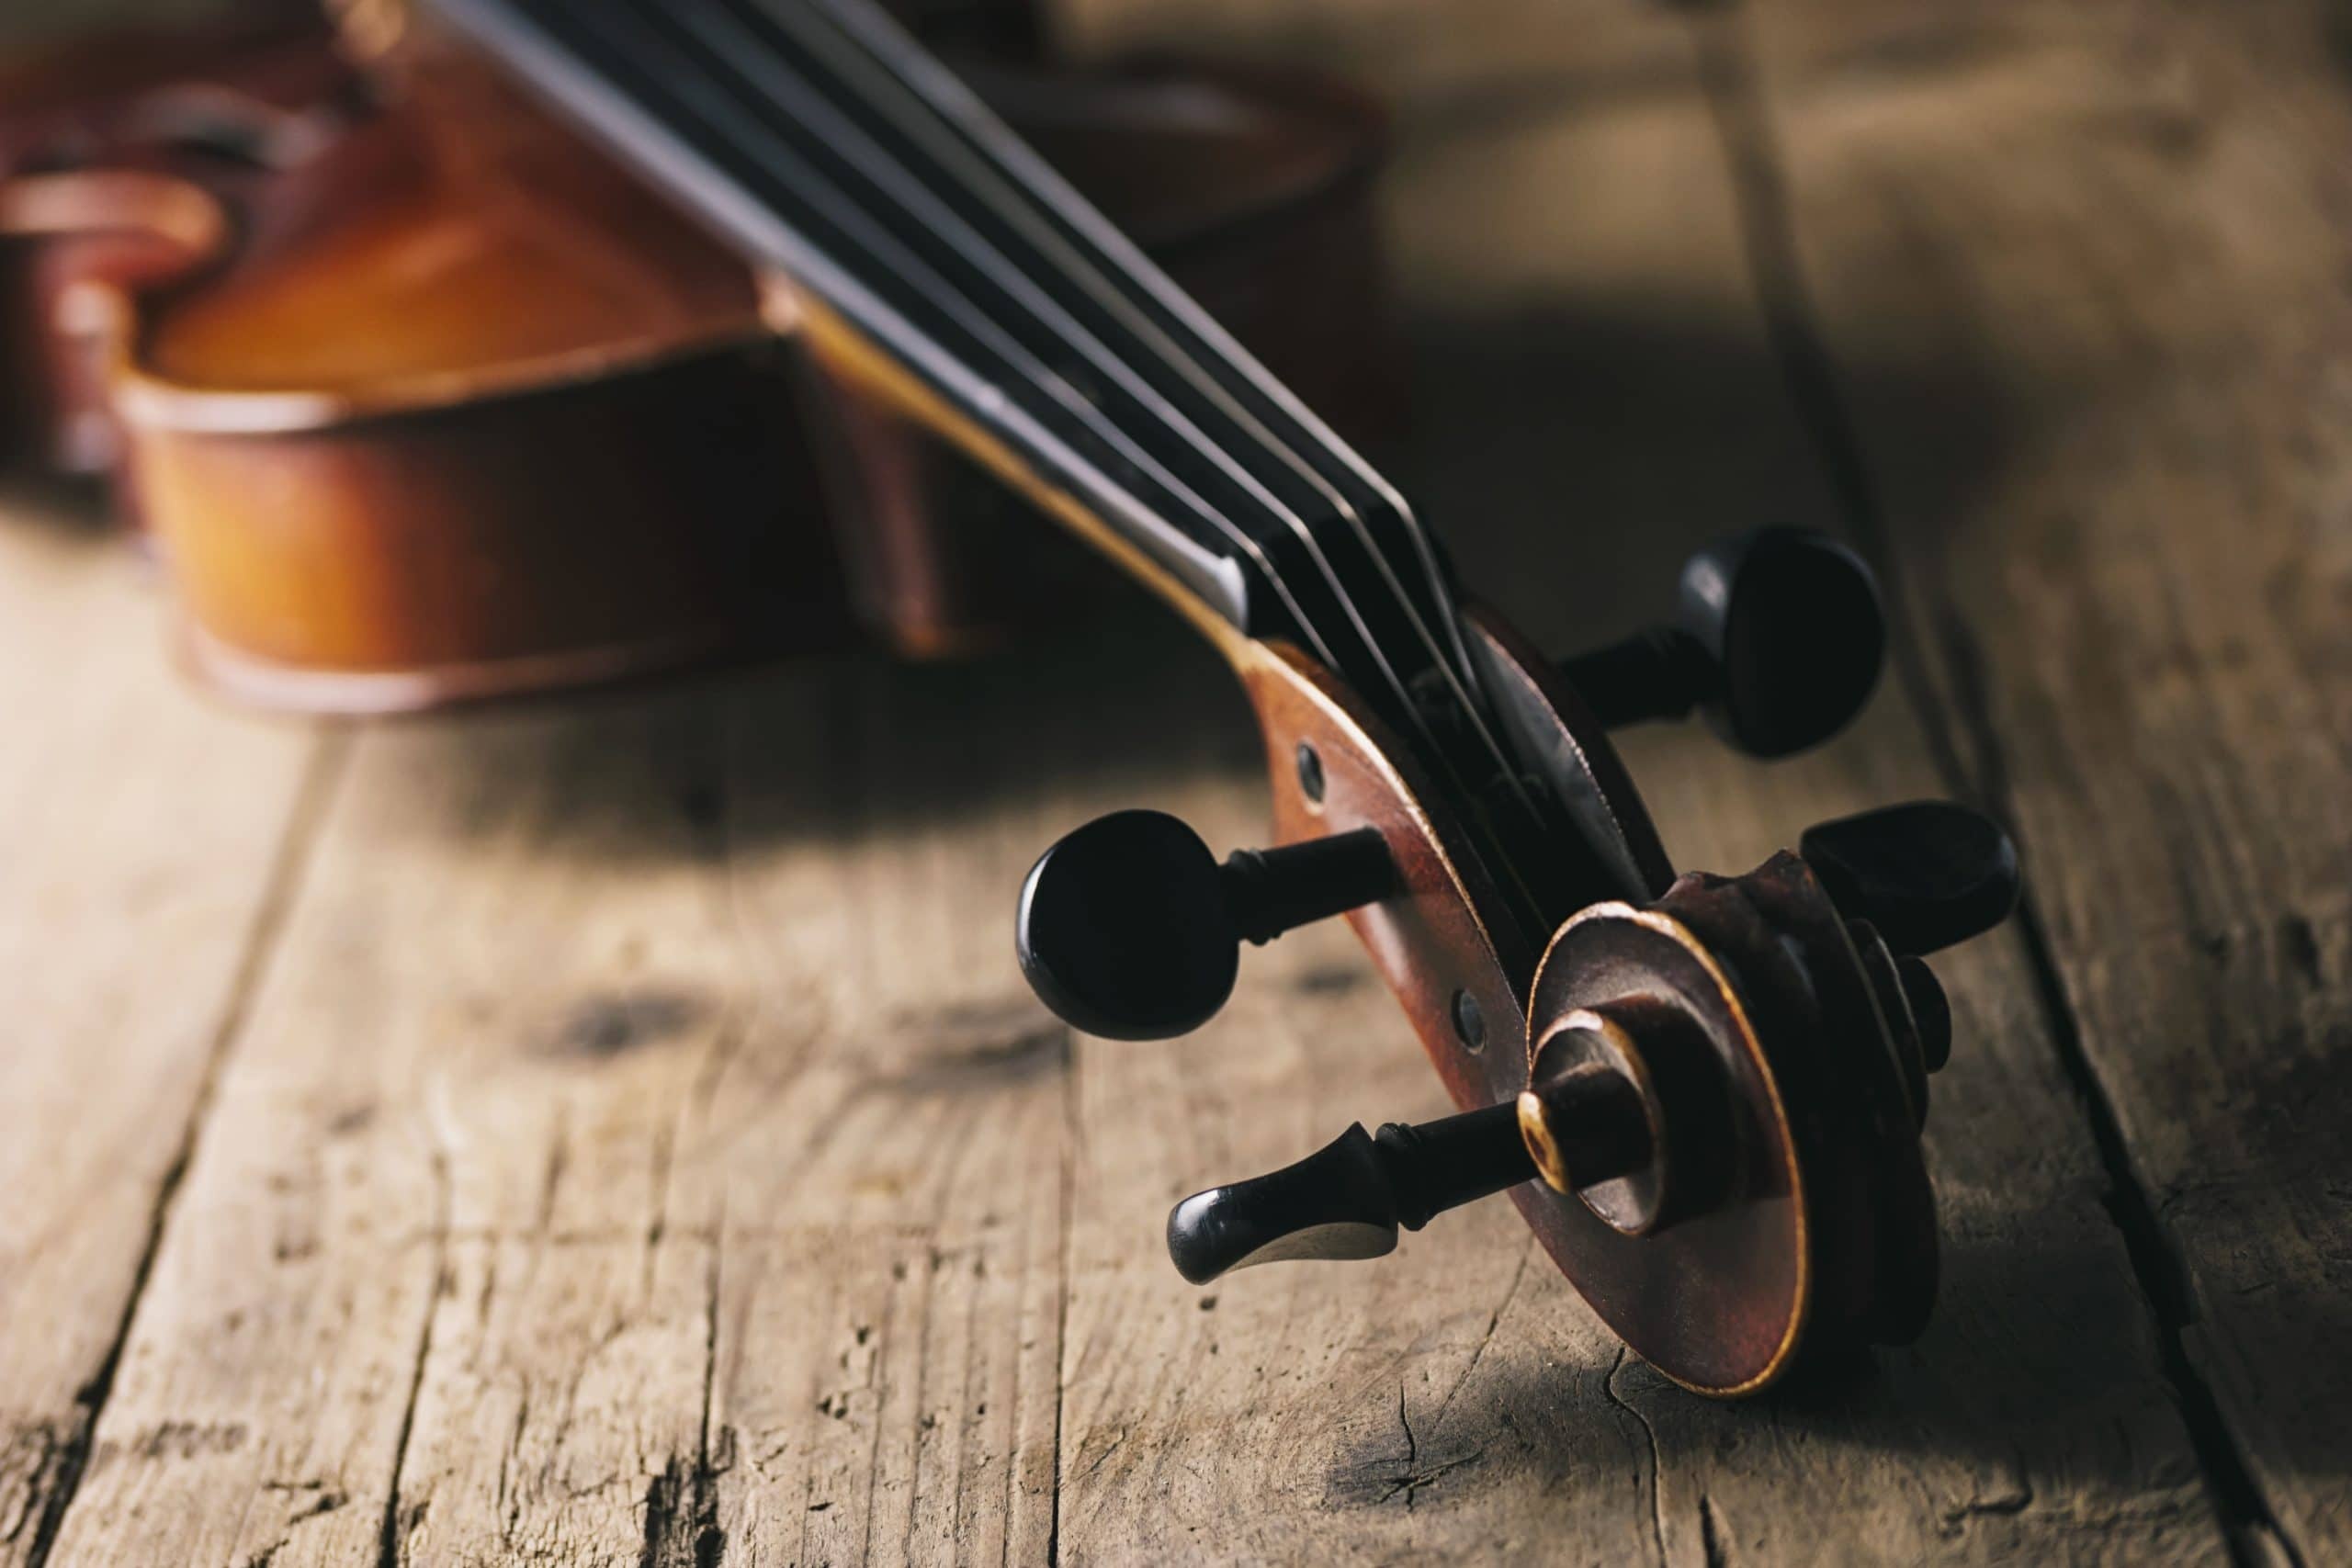 Violoncello: Classical Music And Instrument, Close Up View For Pegbox. 2560x1710 HD Background.